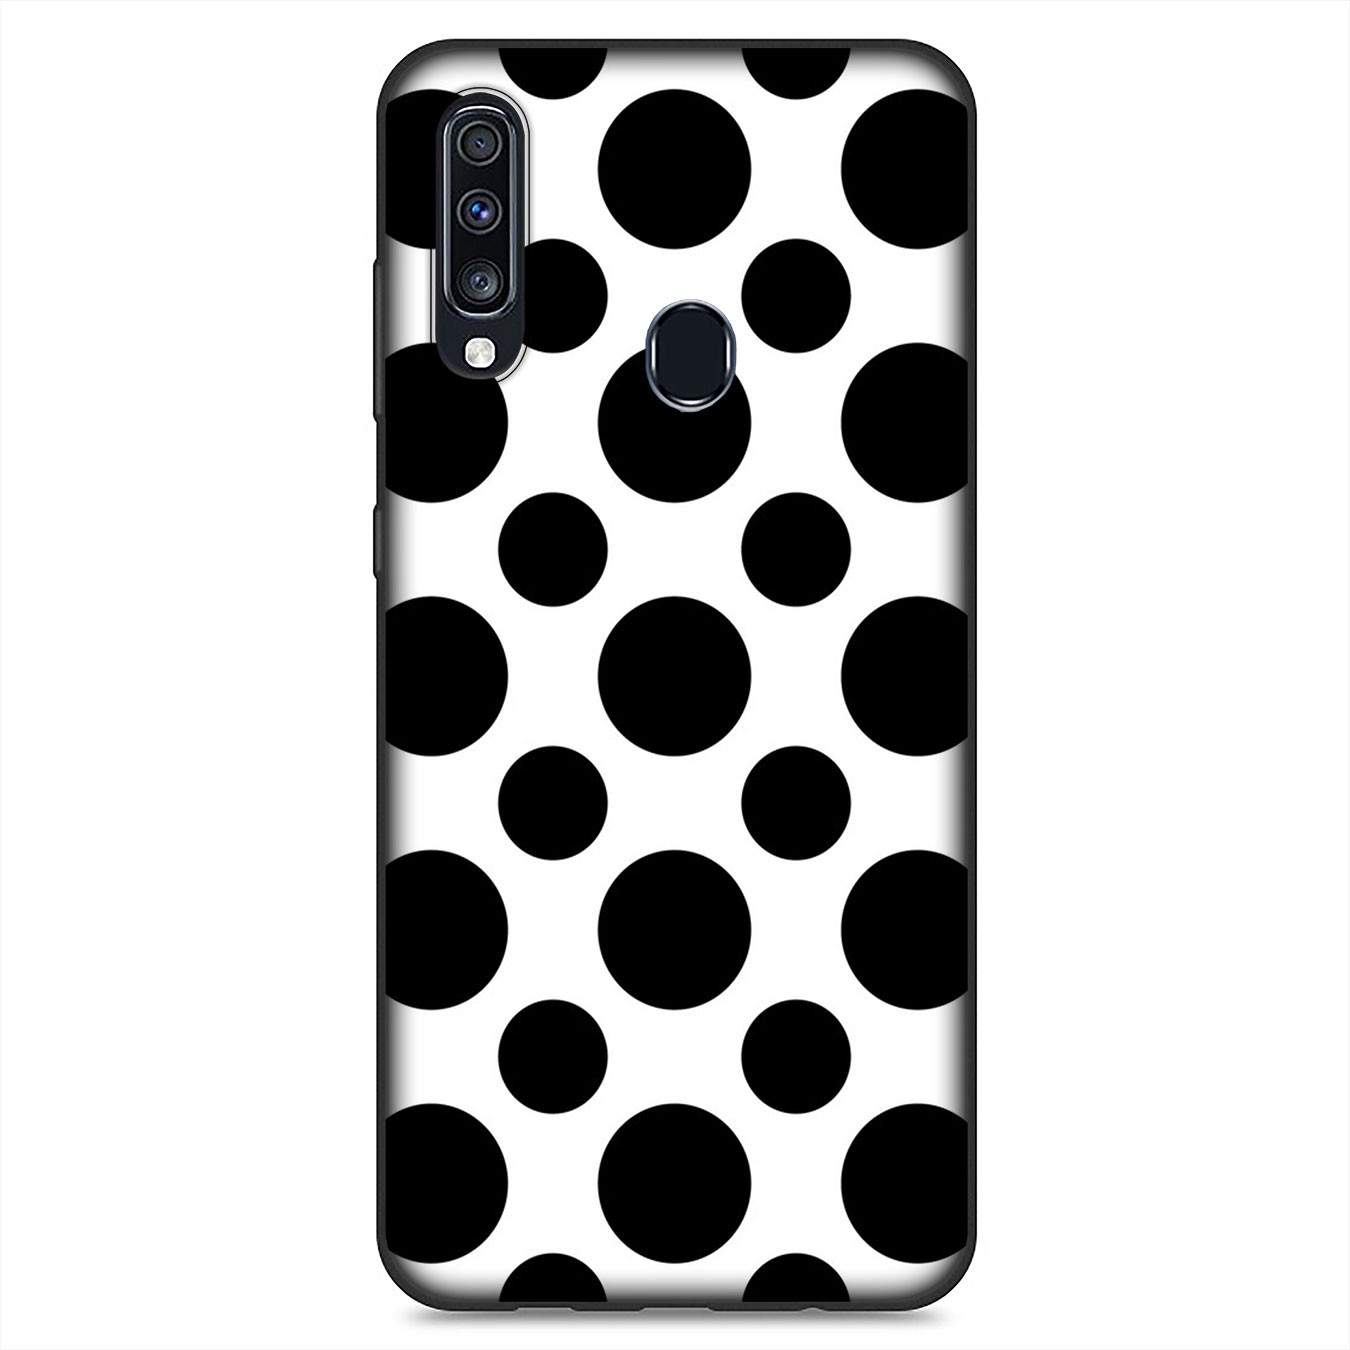 Samsung Galaxy S21 Ultra S8 Plus F62 M62 A2 A32 A52 A72 S21+ S8+ S21Plus Casing Soft Silicone Phone Case black and white Round Dots Cover